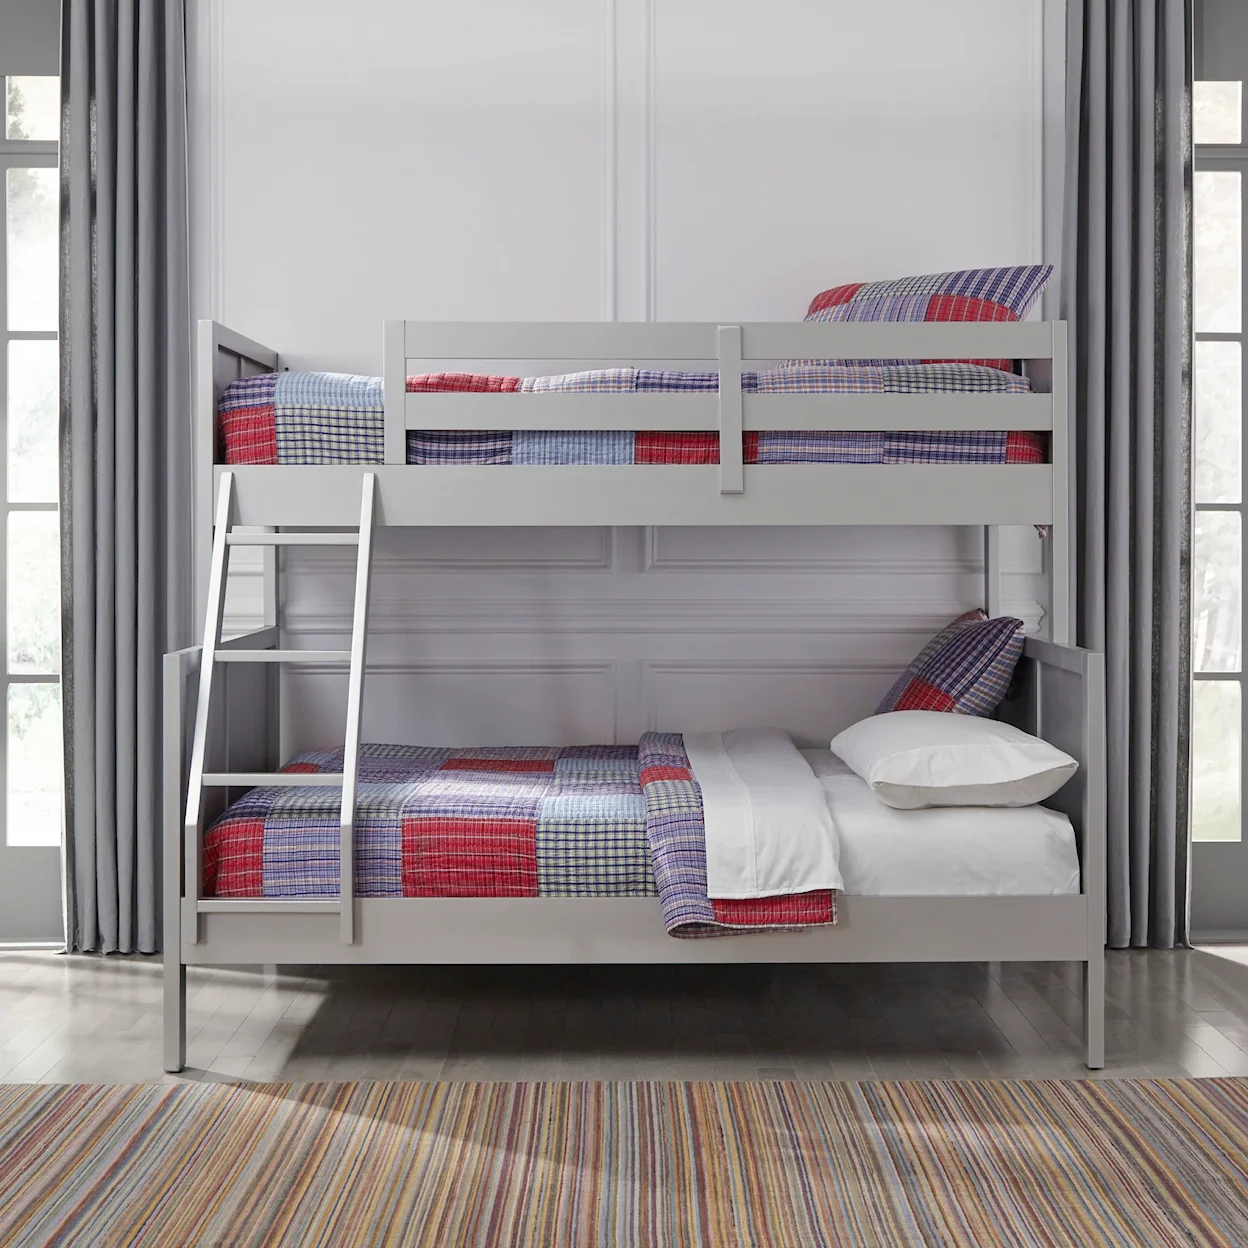 homestyles Venice Twin Over Full Bunk Bed